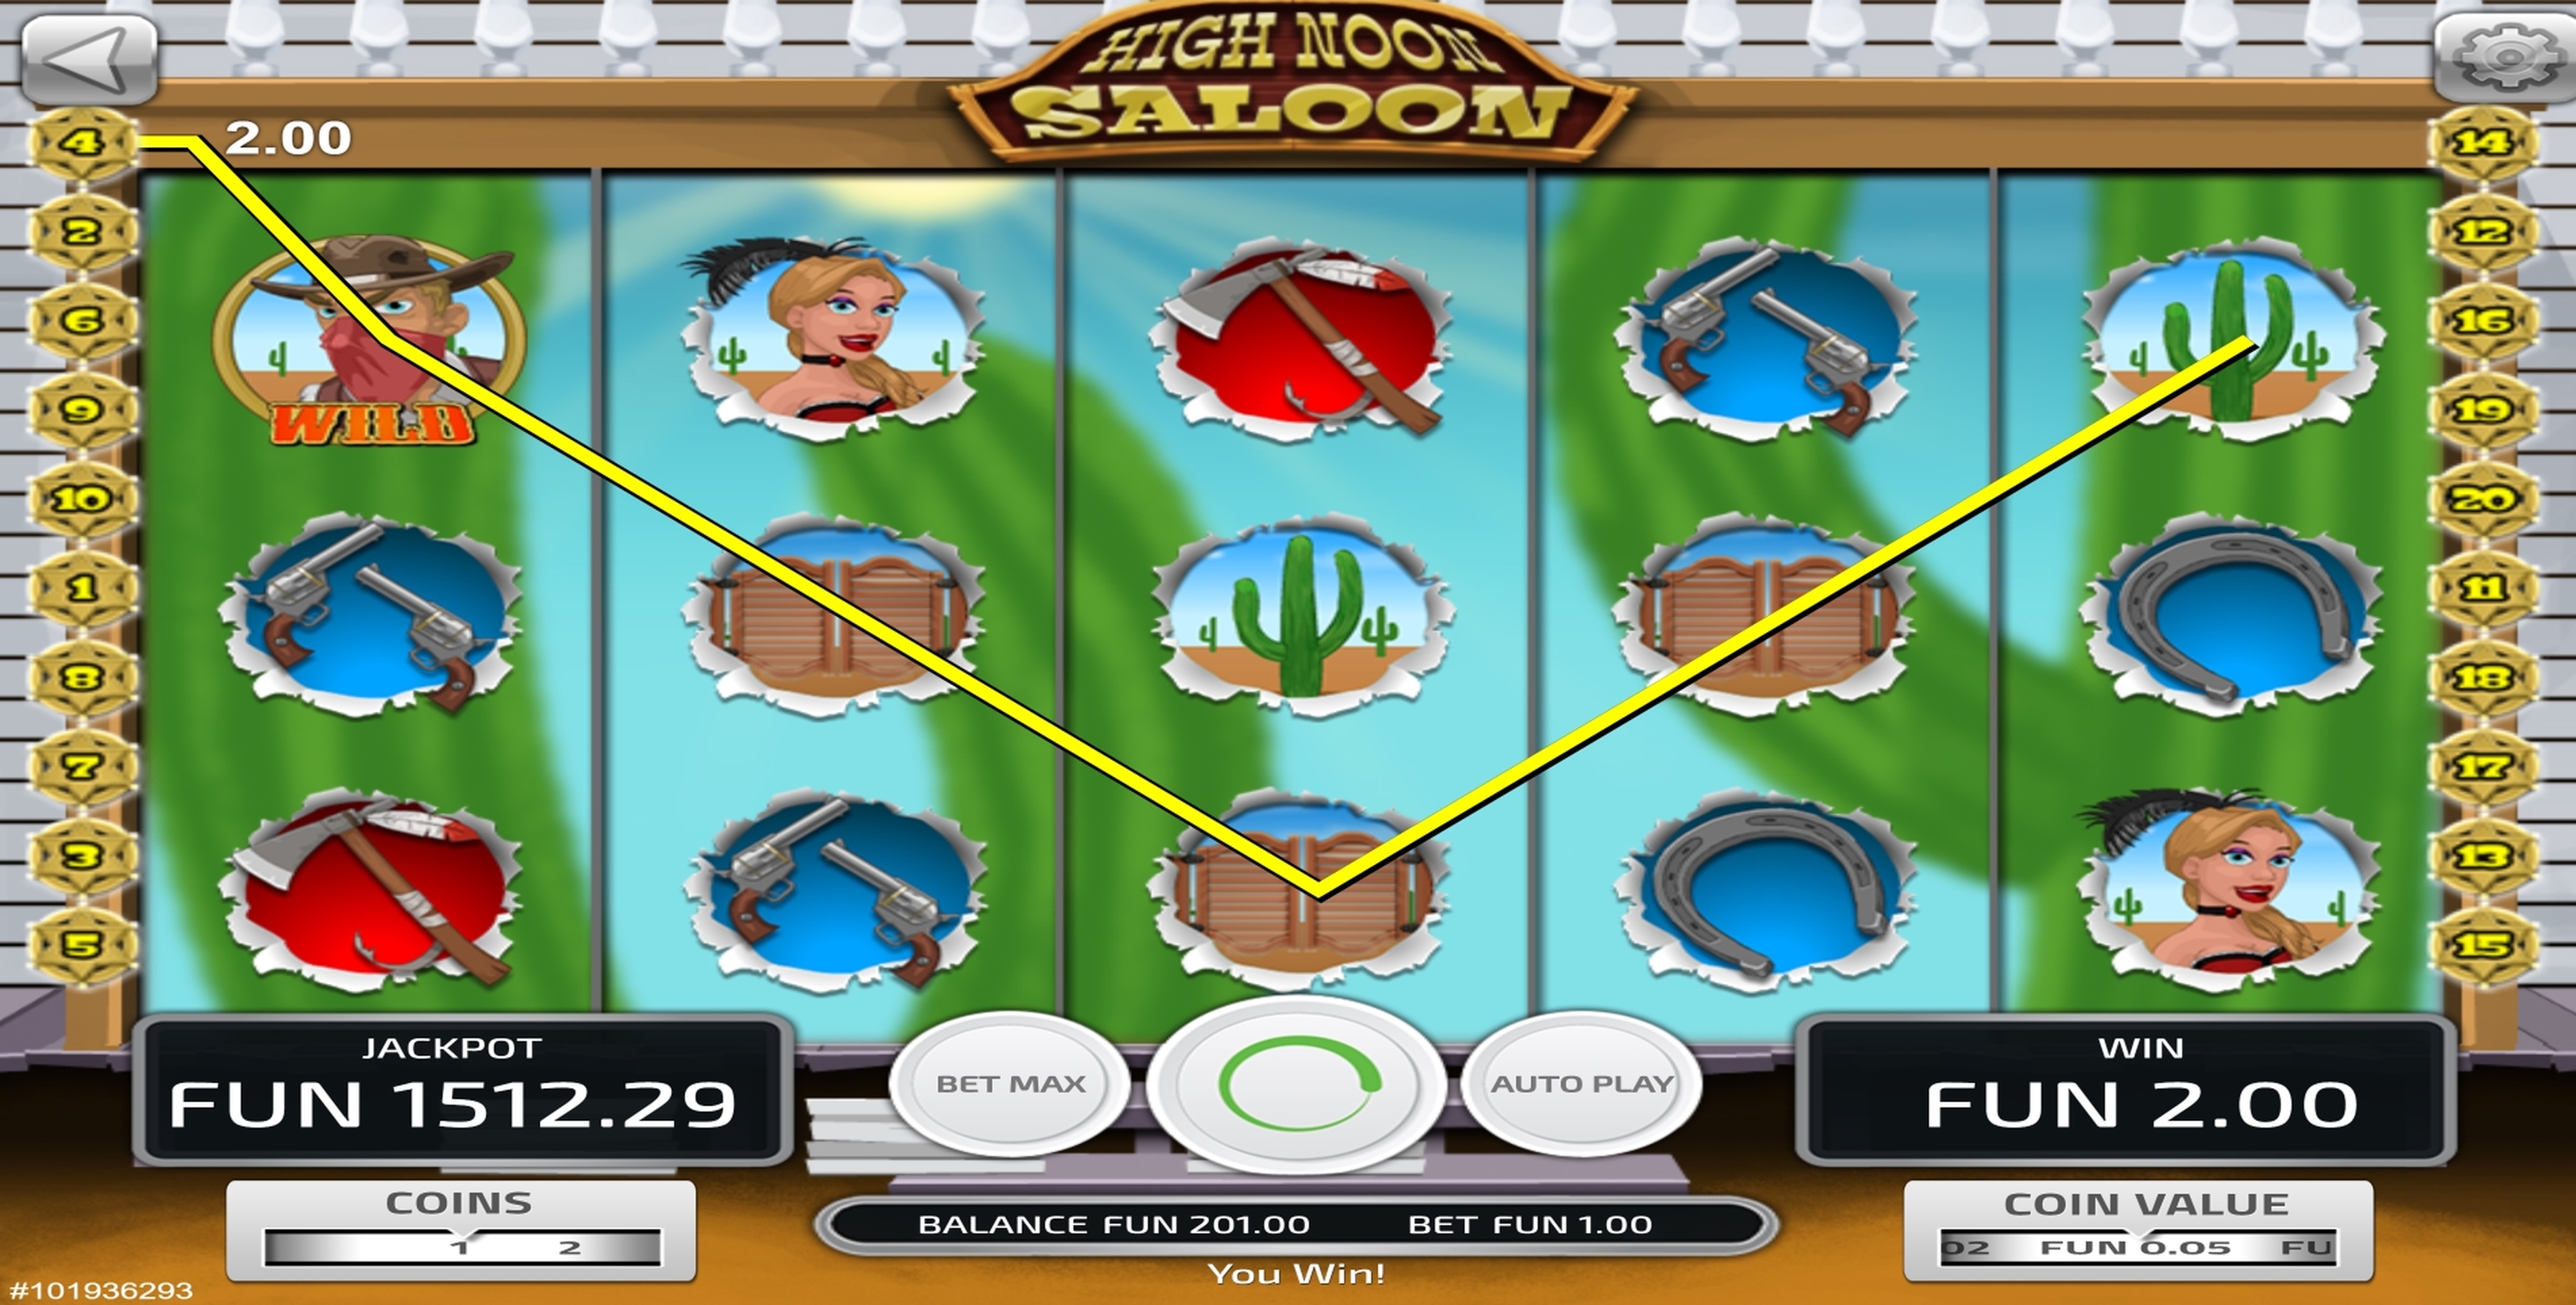 Win Money in High Noon Saloon Free Slot Game by Concept Gaming